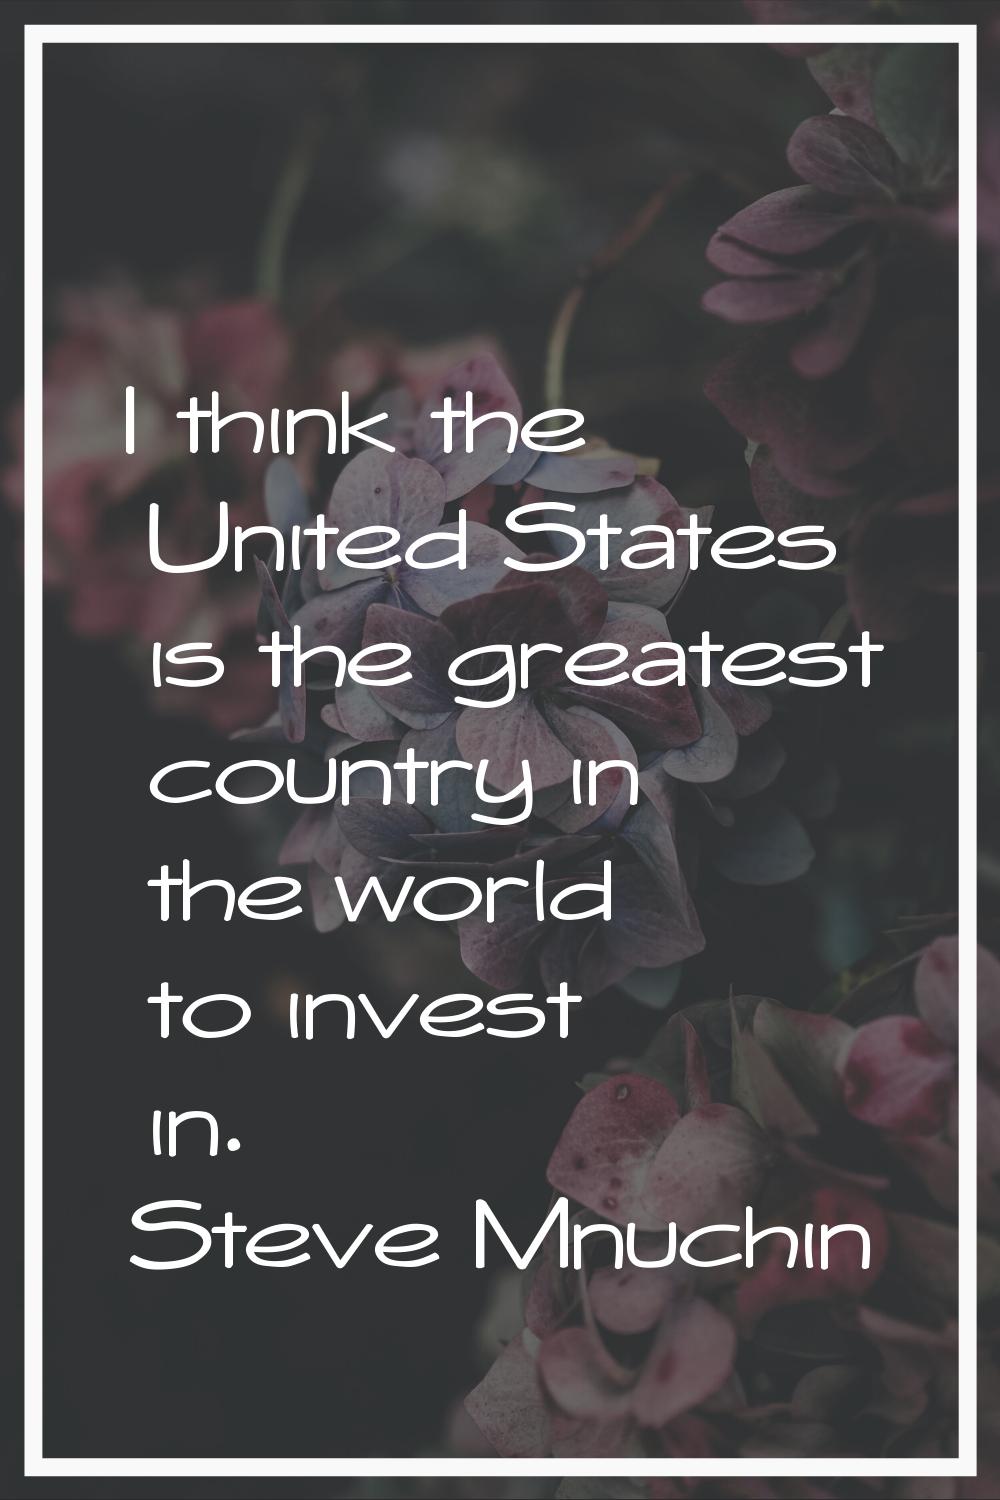 I think the United States is the greatest country in the world to invest in.